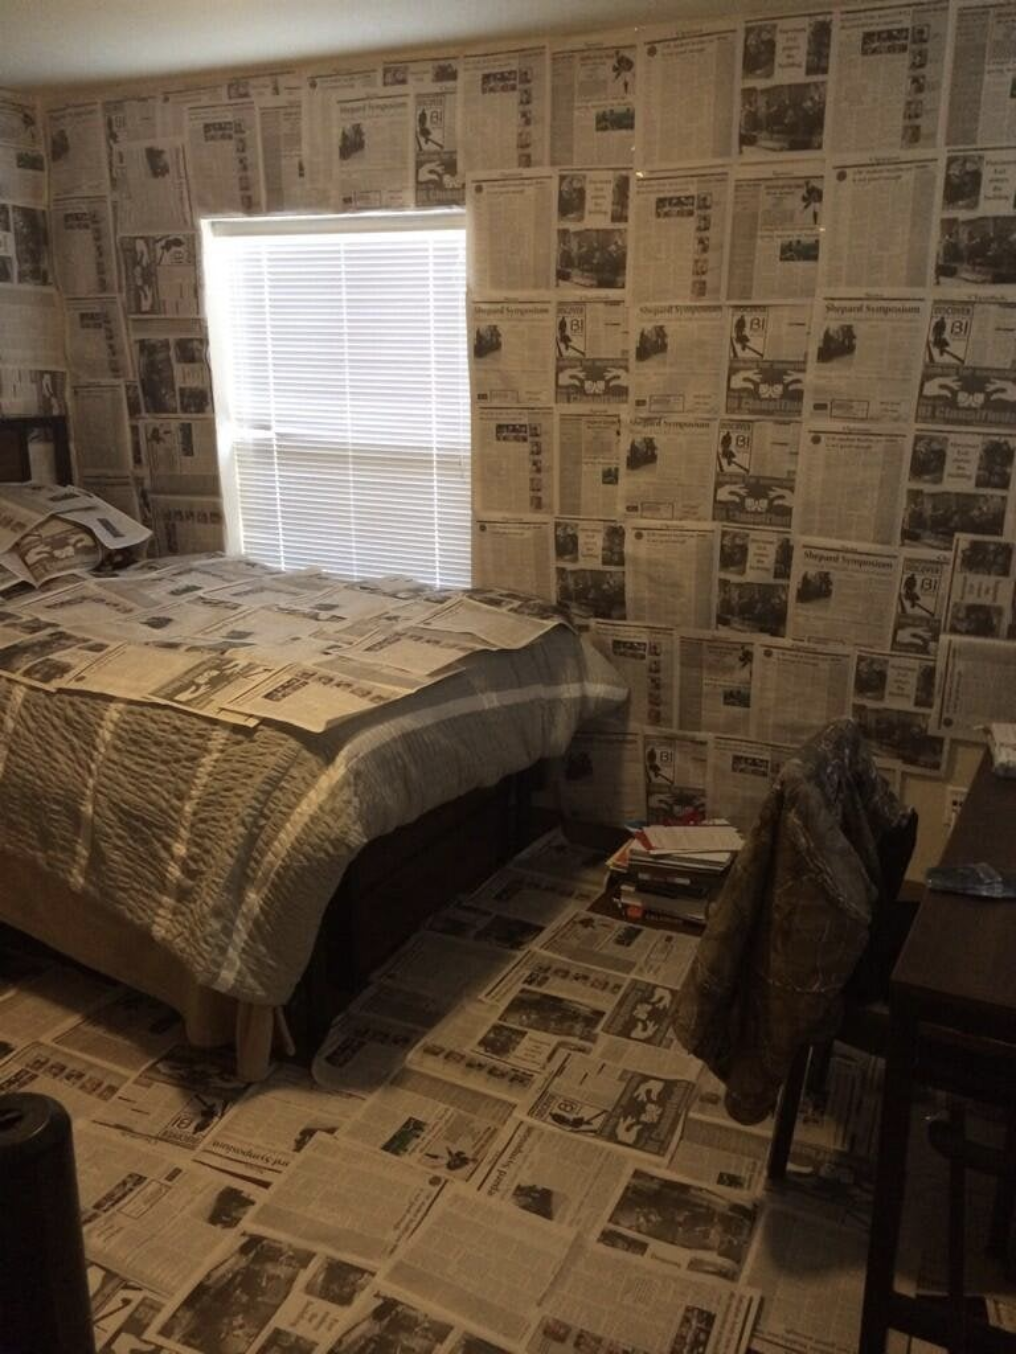 There is newspaper from floor to ceiling in the room